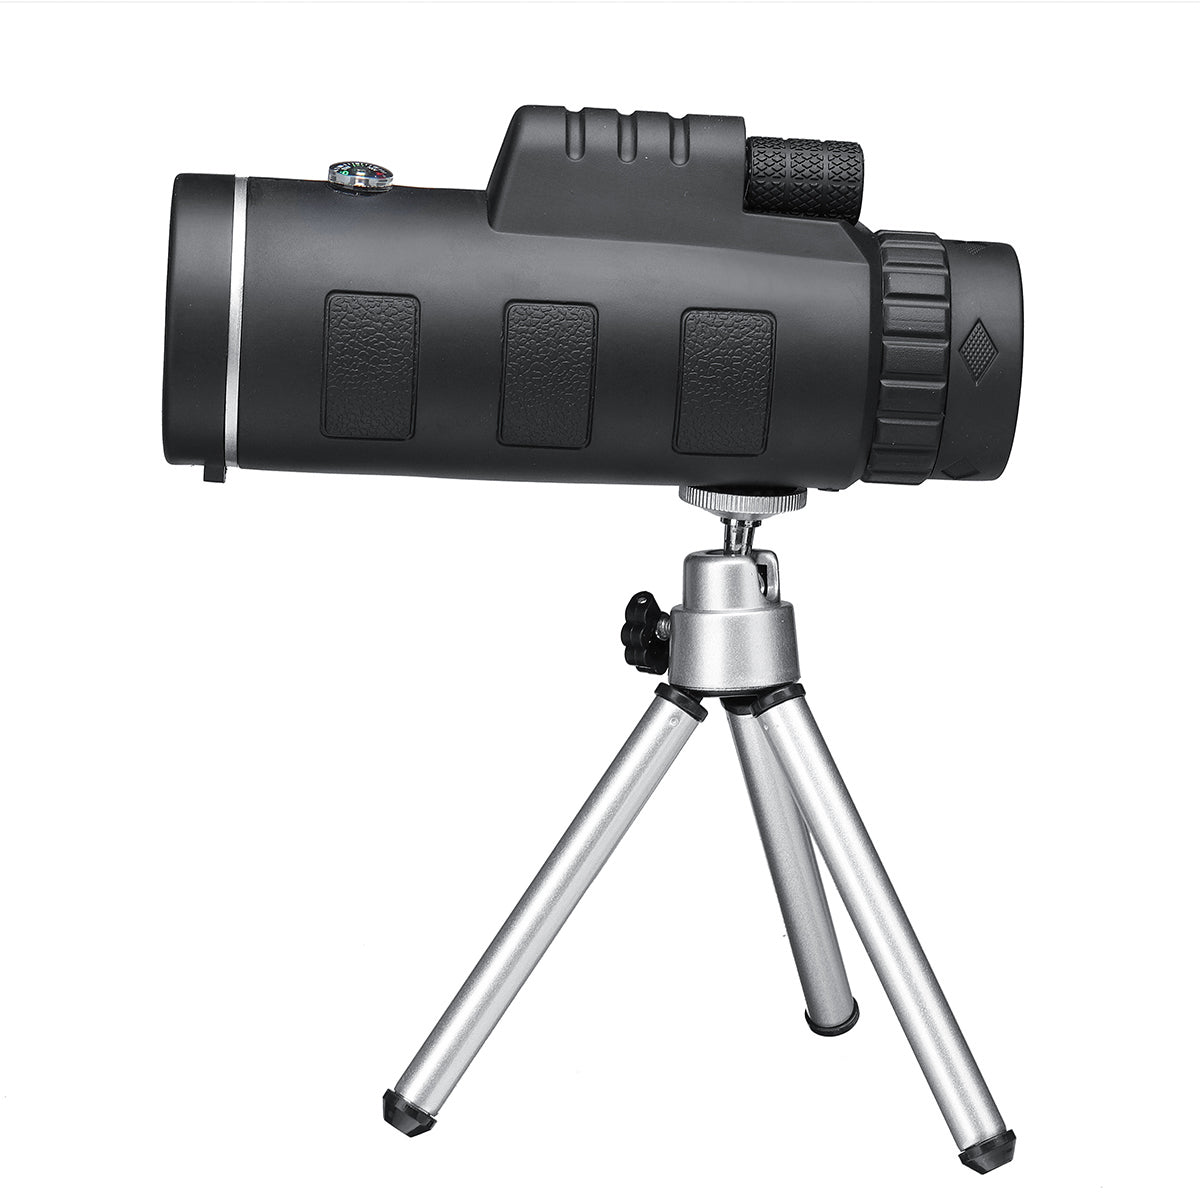 Professional Grade 50X HD Monocular Night Vision Telescope Kit with Mobile Phone Clip and Tripod